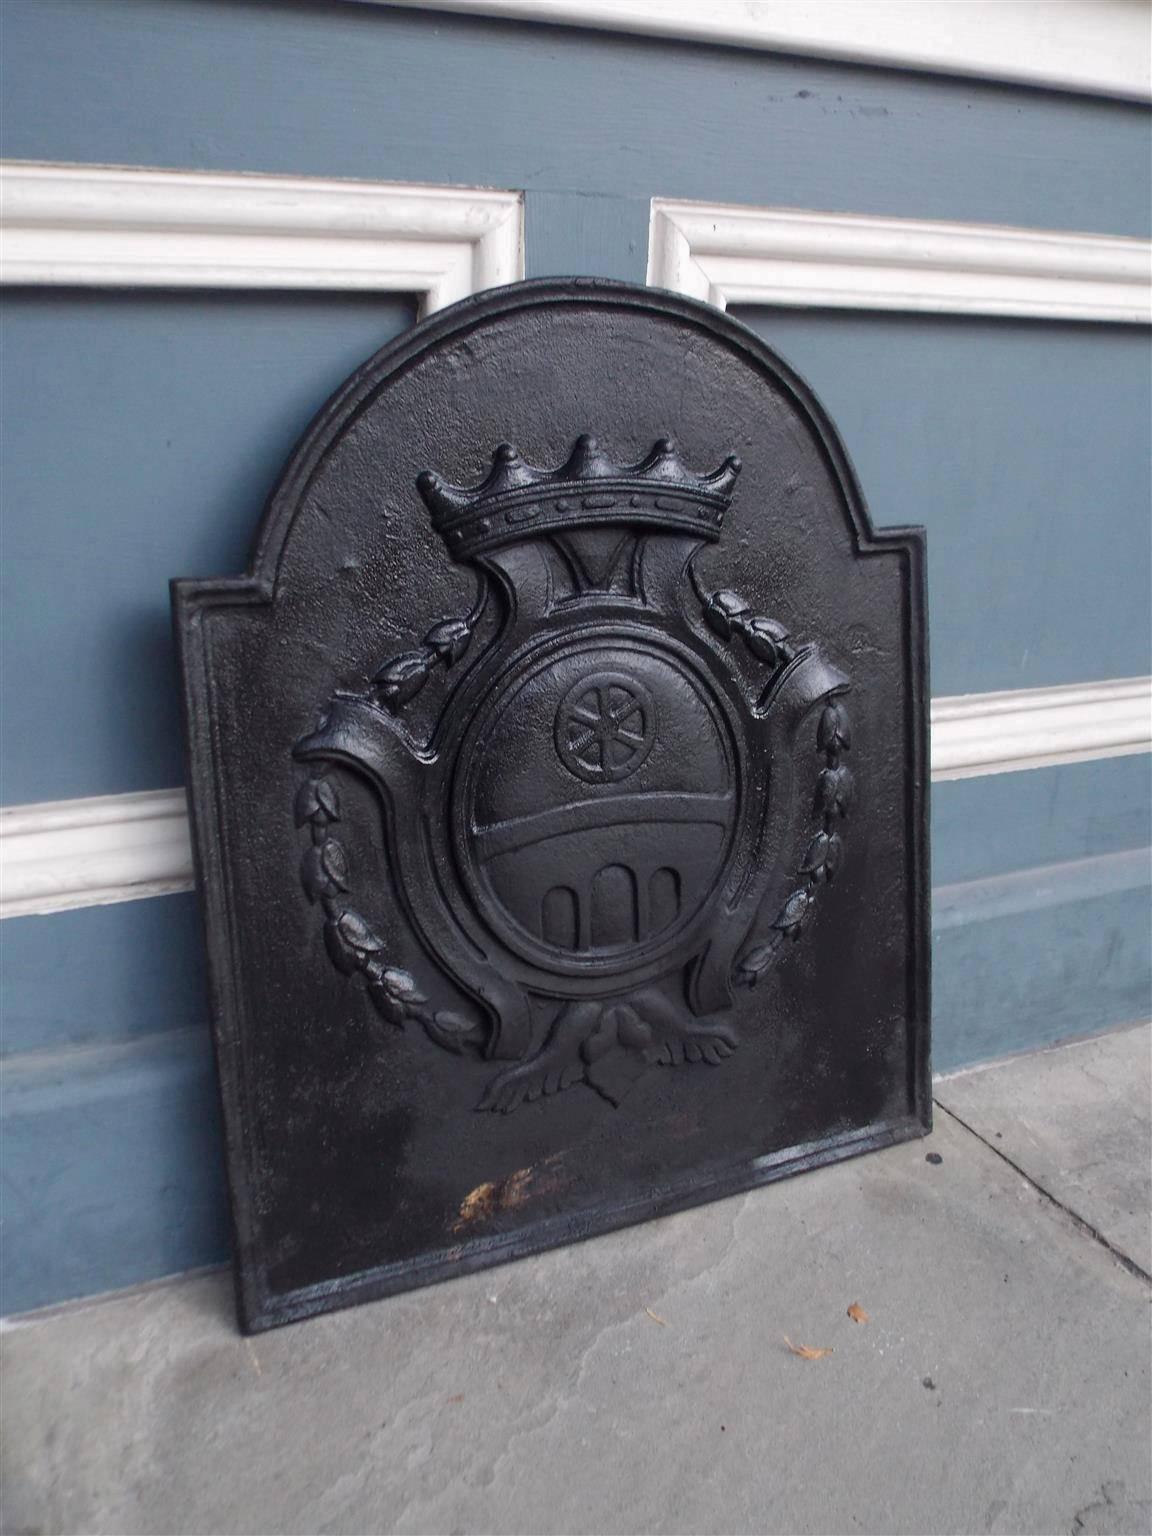 English cast iron tombstone shaped fireback with coat of arms motif depicting crown, bell flower, and floral motif. Late 18th Century.